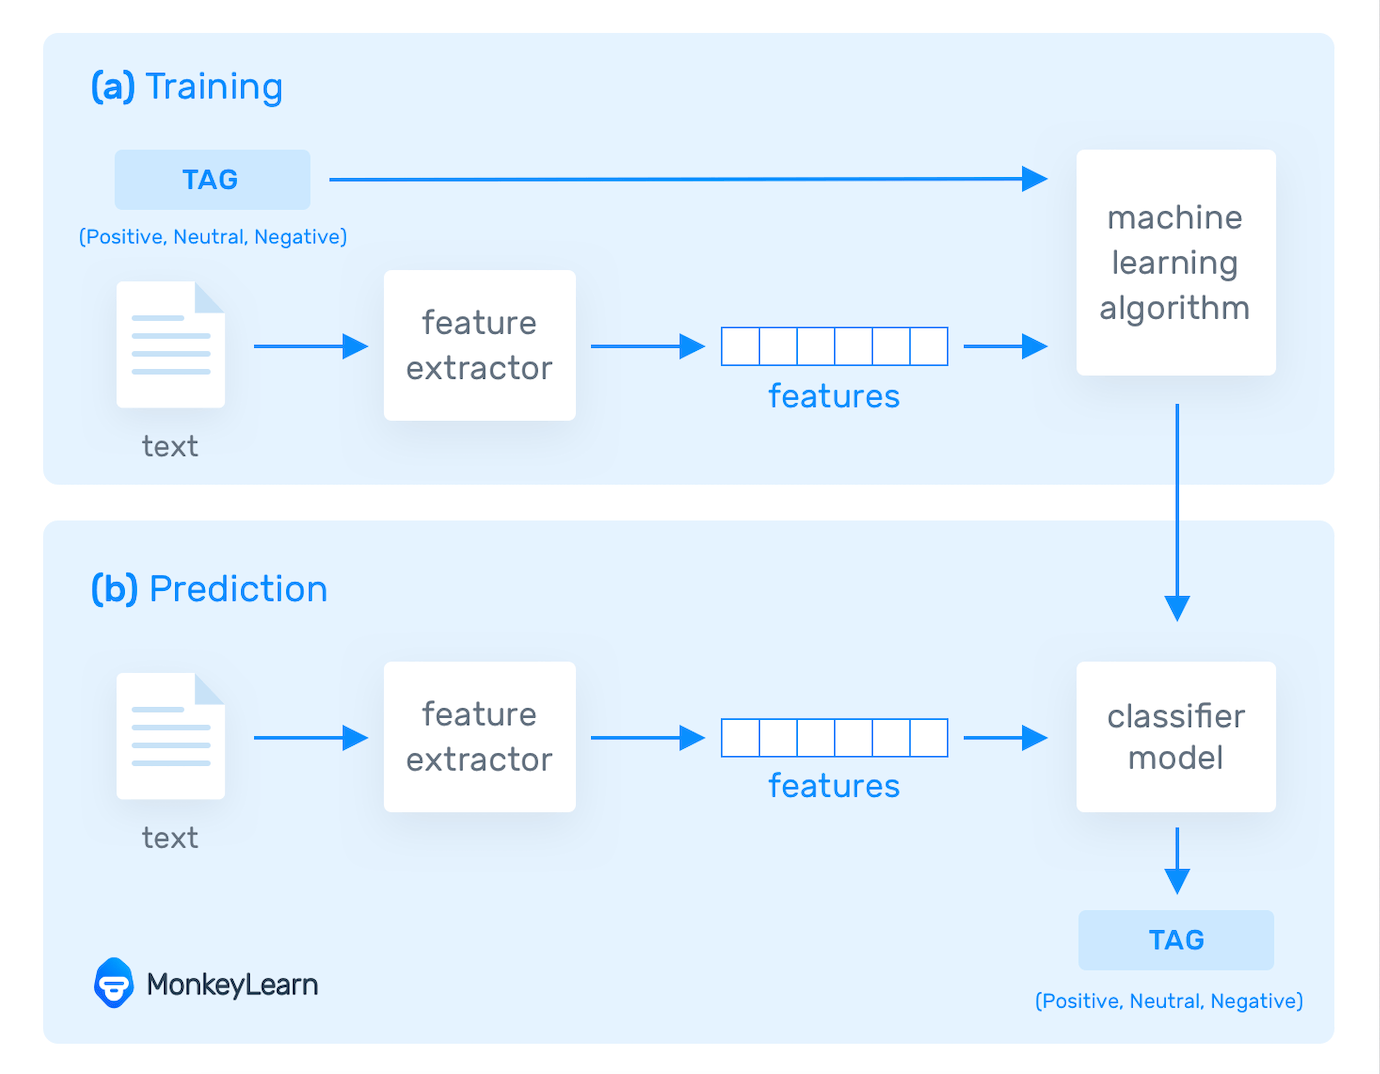 A diagram showing how machine learning models are trained with text features.